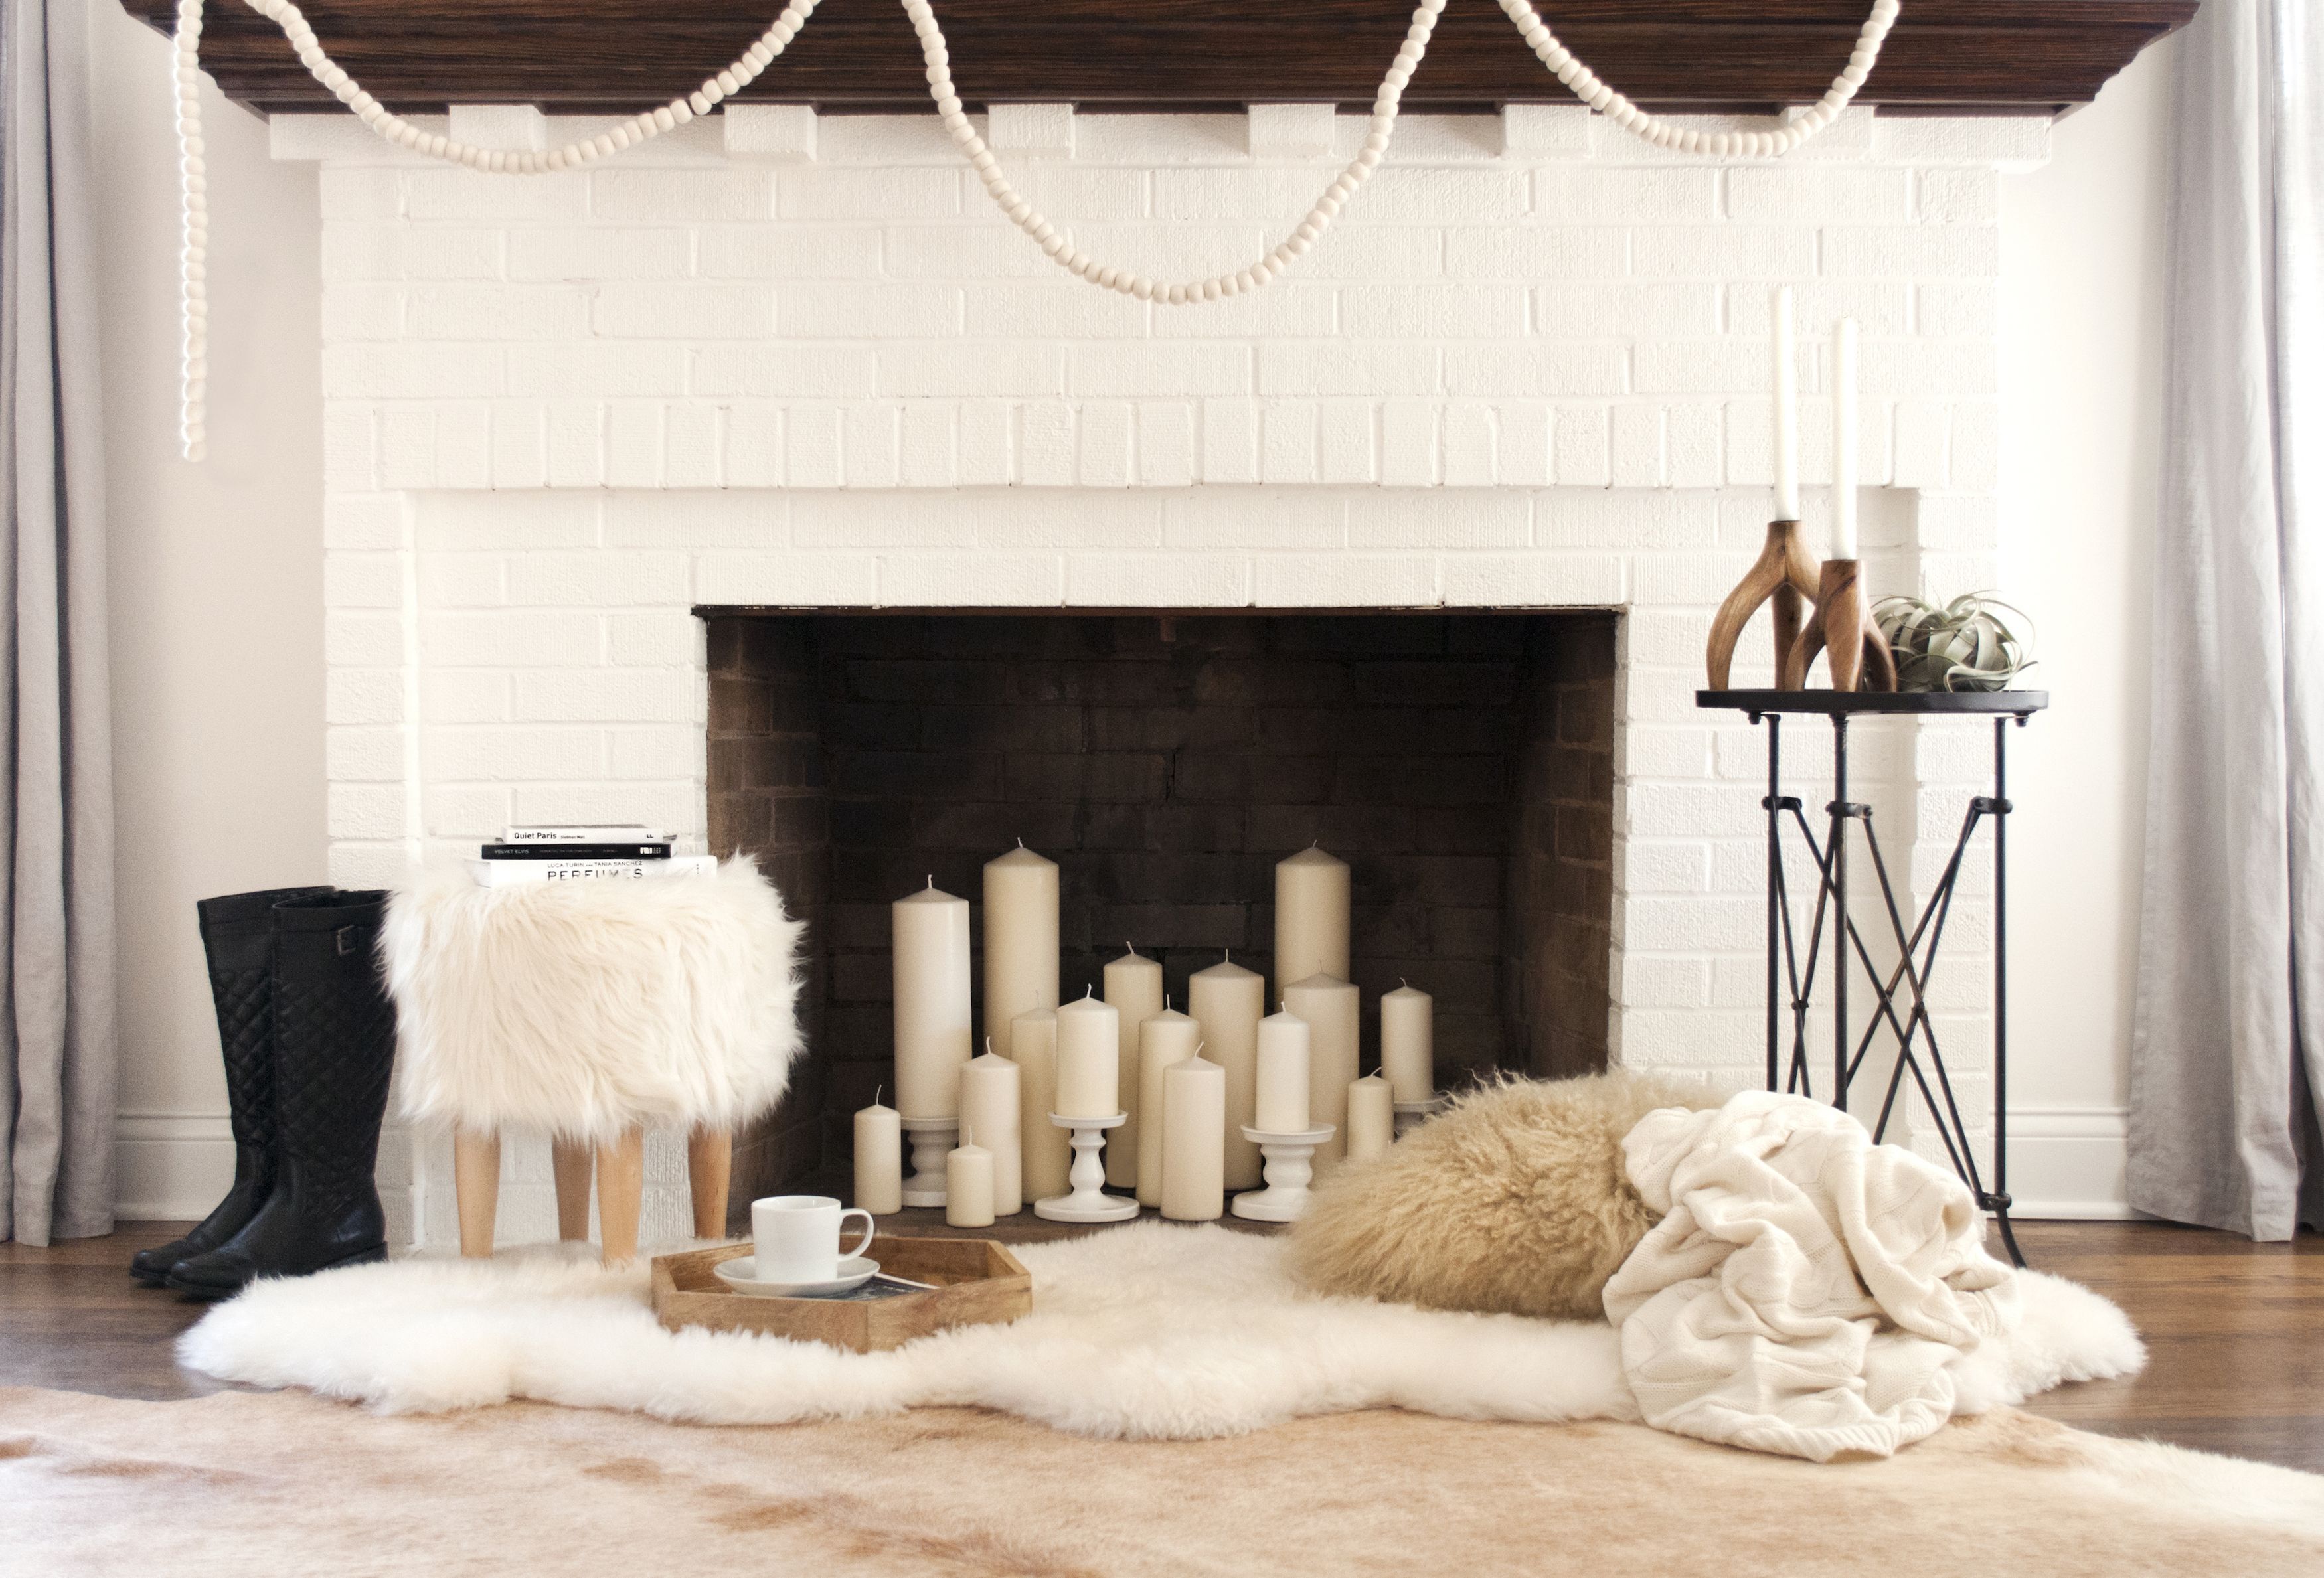 12 Decorating Ideas For Nonworking Fireplace Design Living Room